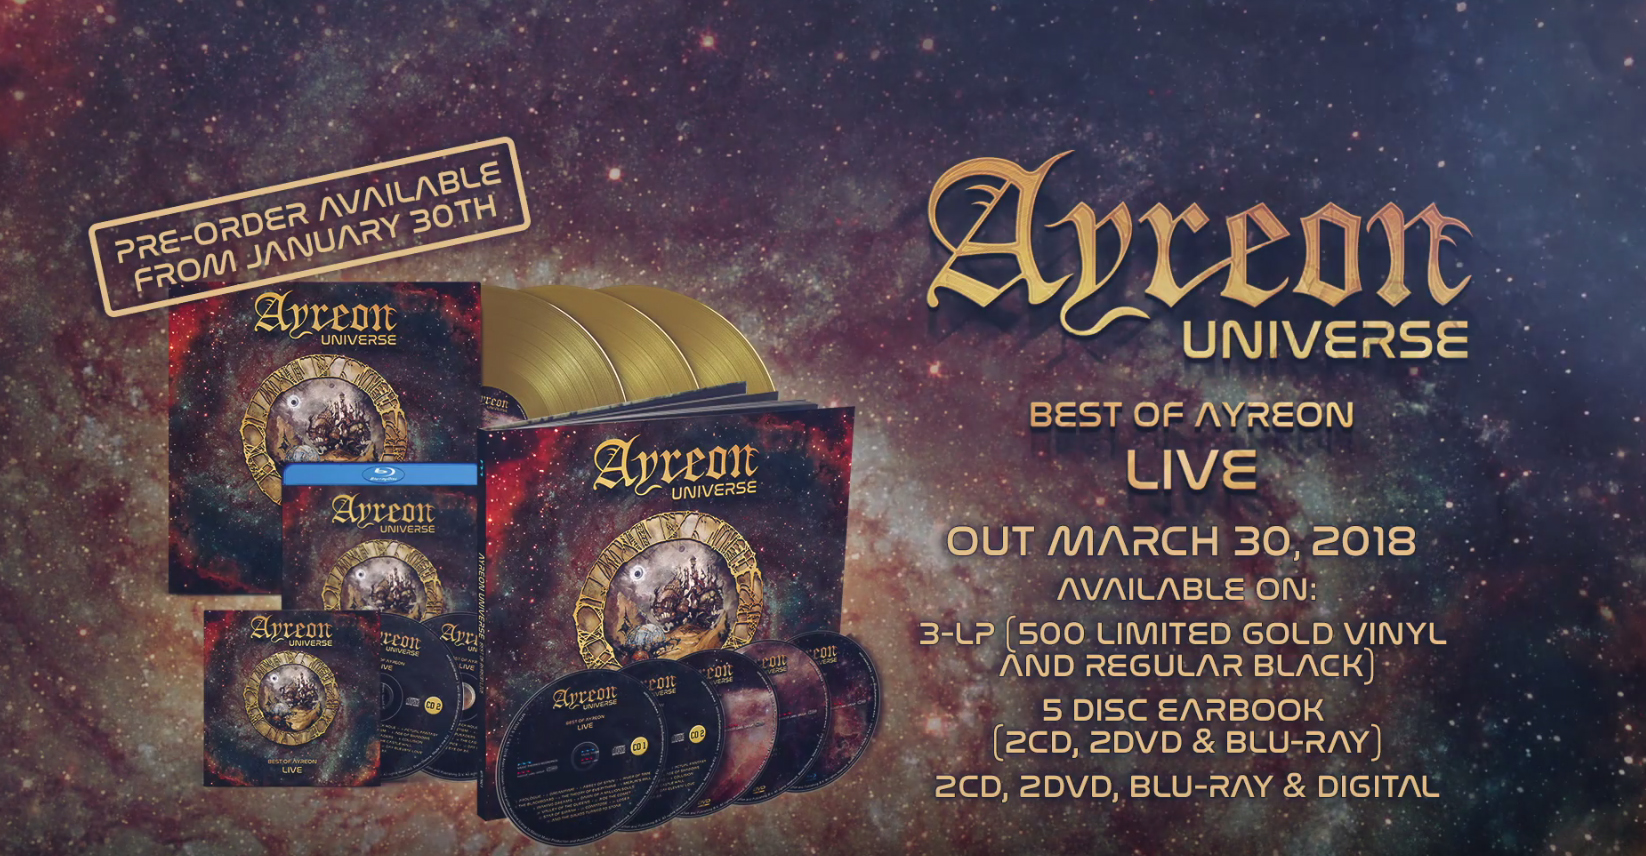 Ayreon Universe - Best of Ayreon Live to be released on CD/DVD/Blu-Ray.